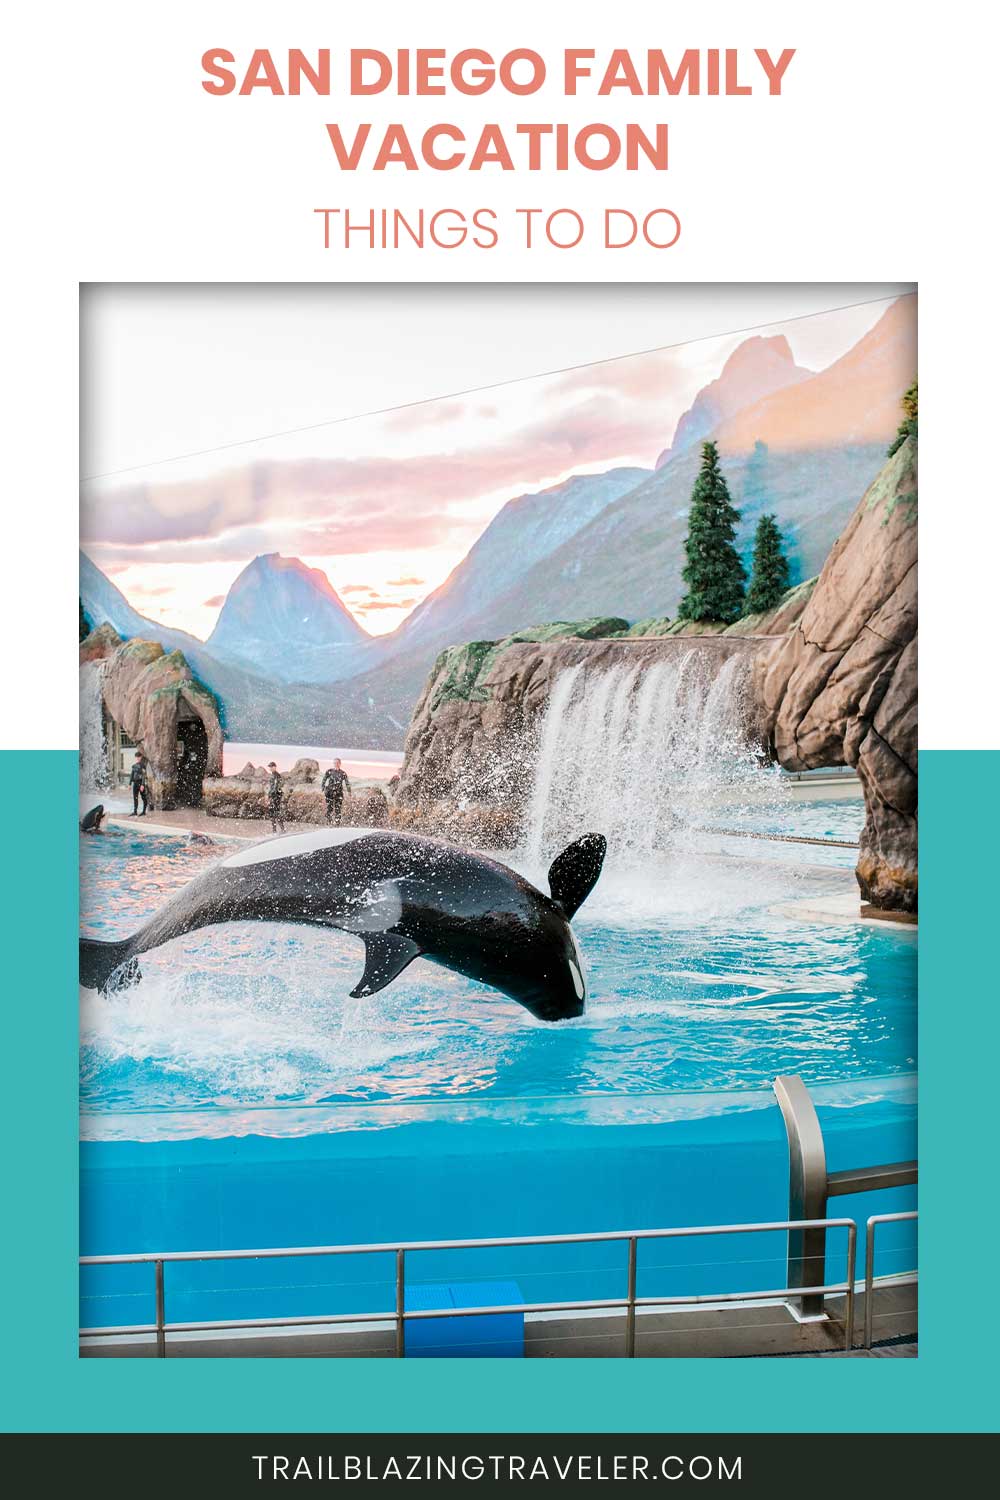 A dolphin jumping in a pool - San Diego Family Vacation Things To Do.